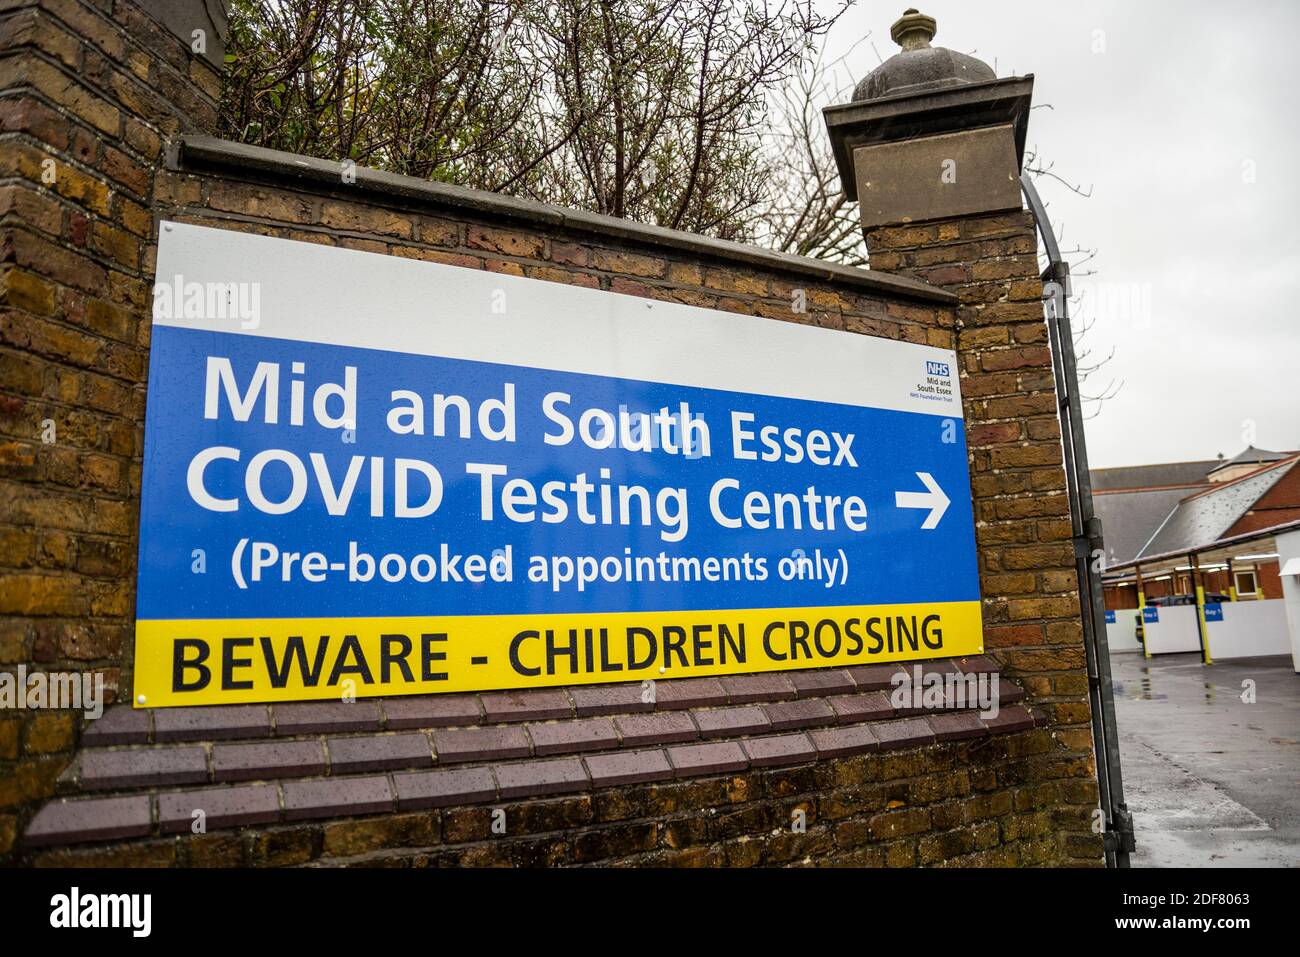 Covid 19 test centre. Mid and South Essex NHS Covid Testing Centre in Southend on Sea, Essex, UK. Pre booked appointments only, sign. Community Stock Photo